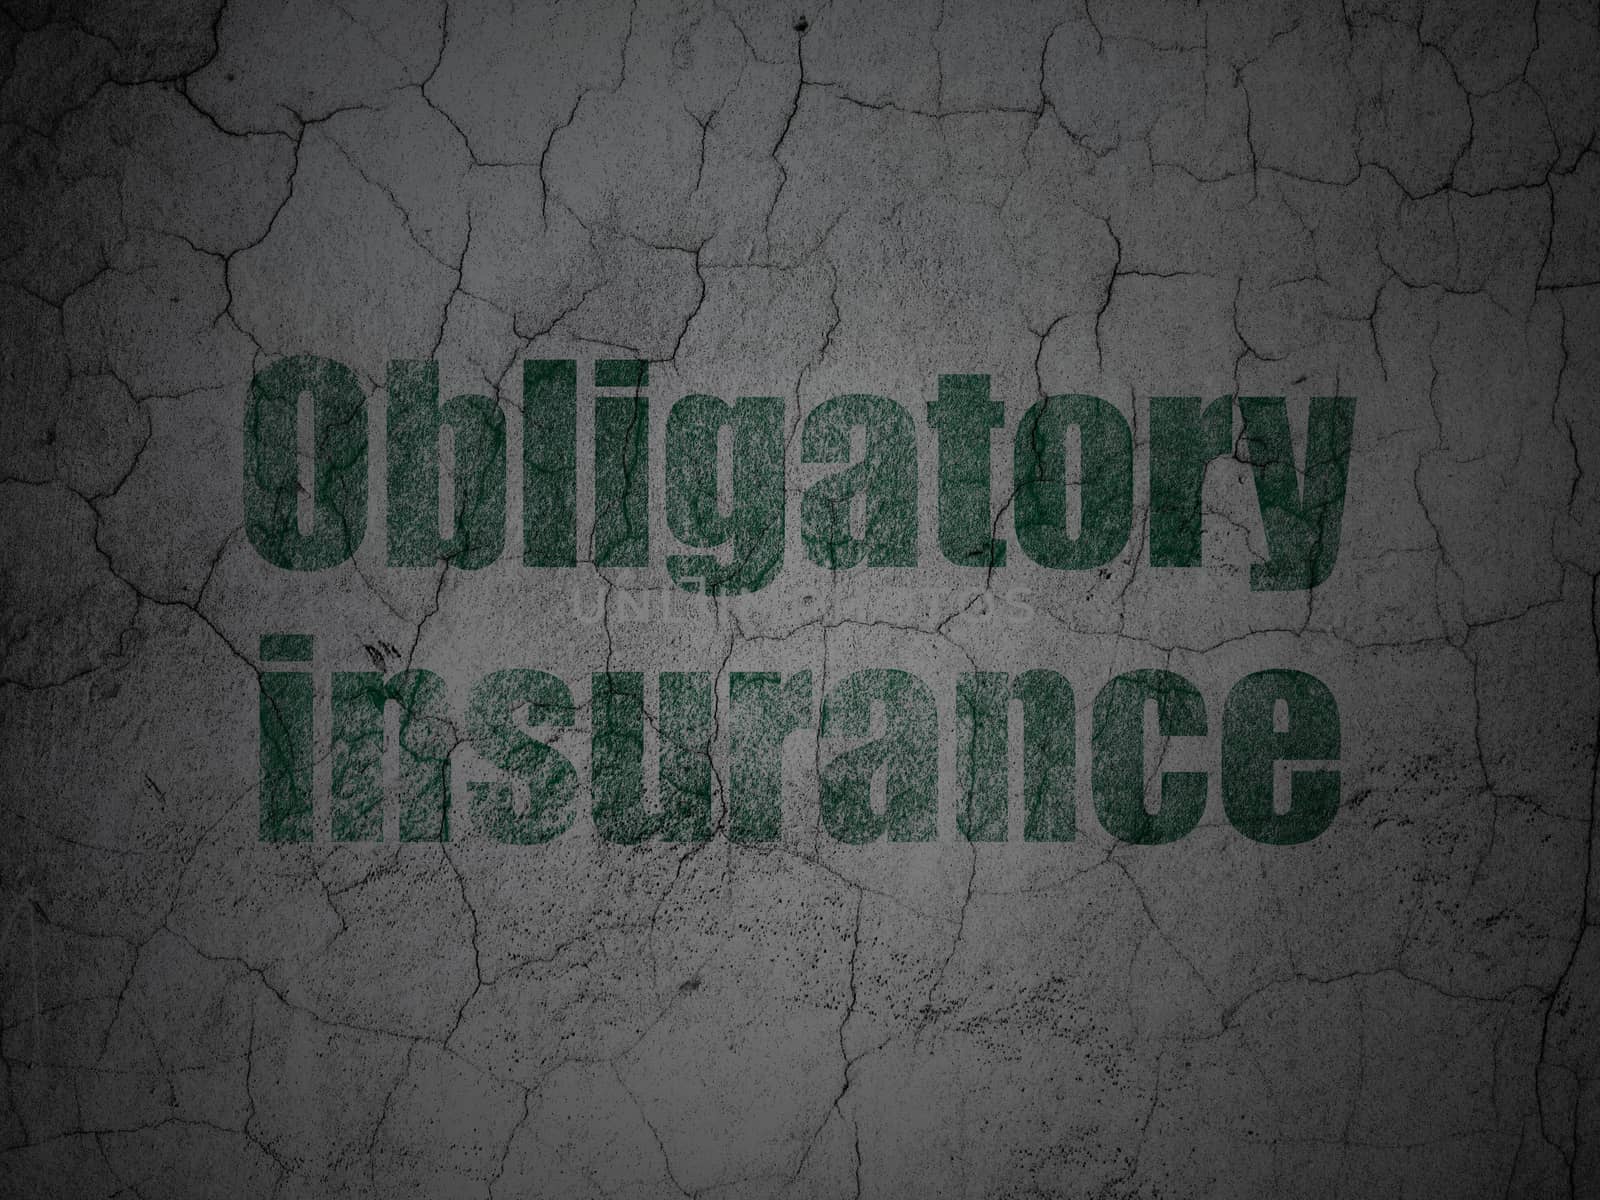 Insurance concept: Green Obligatory Insurance on grunge textured concrete wall background